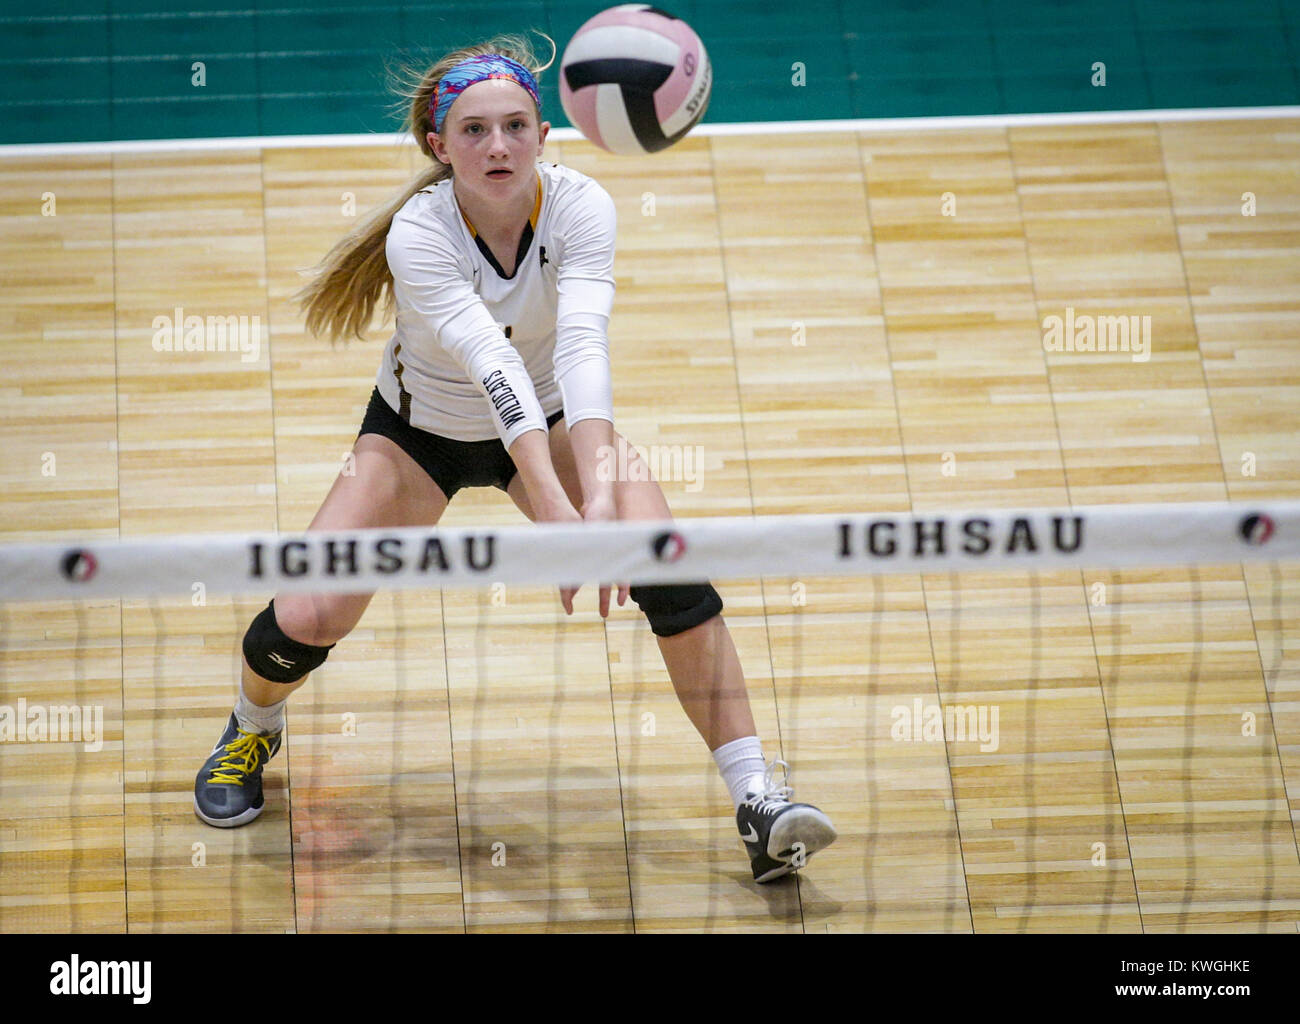 Cedar Rapids, Iowa, USA. 9th Nov, 2016. Janesville's Lily Liekweg (1) makes a dig during Janesville vs Starmont Class 1A quarterfinal-round state volleyball action played Wednesday, Nov. 9, 2016, at the US Cellular Center in Cedar Rapids, Iowa. Credit: Andy Abeyta/Quad-City Times/Quad-City Times/ZUMA Wire/Alamy Live News Stock Photo